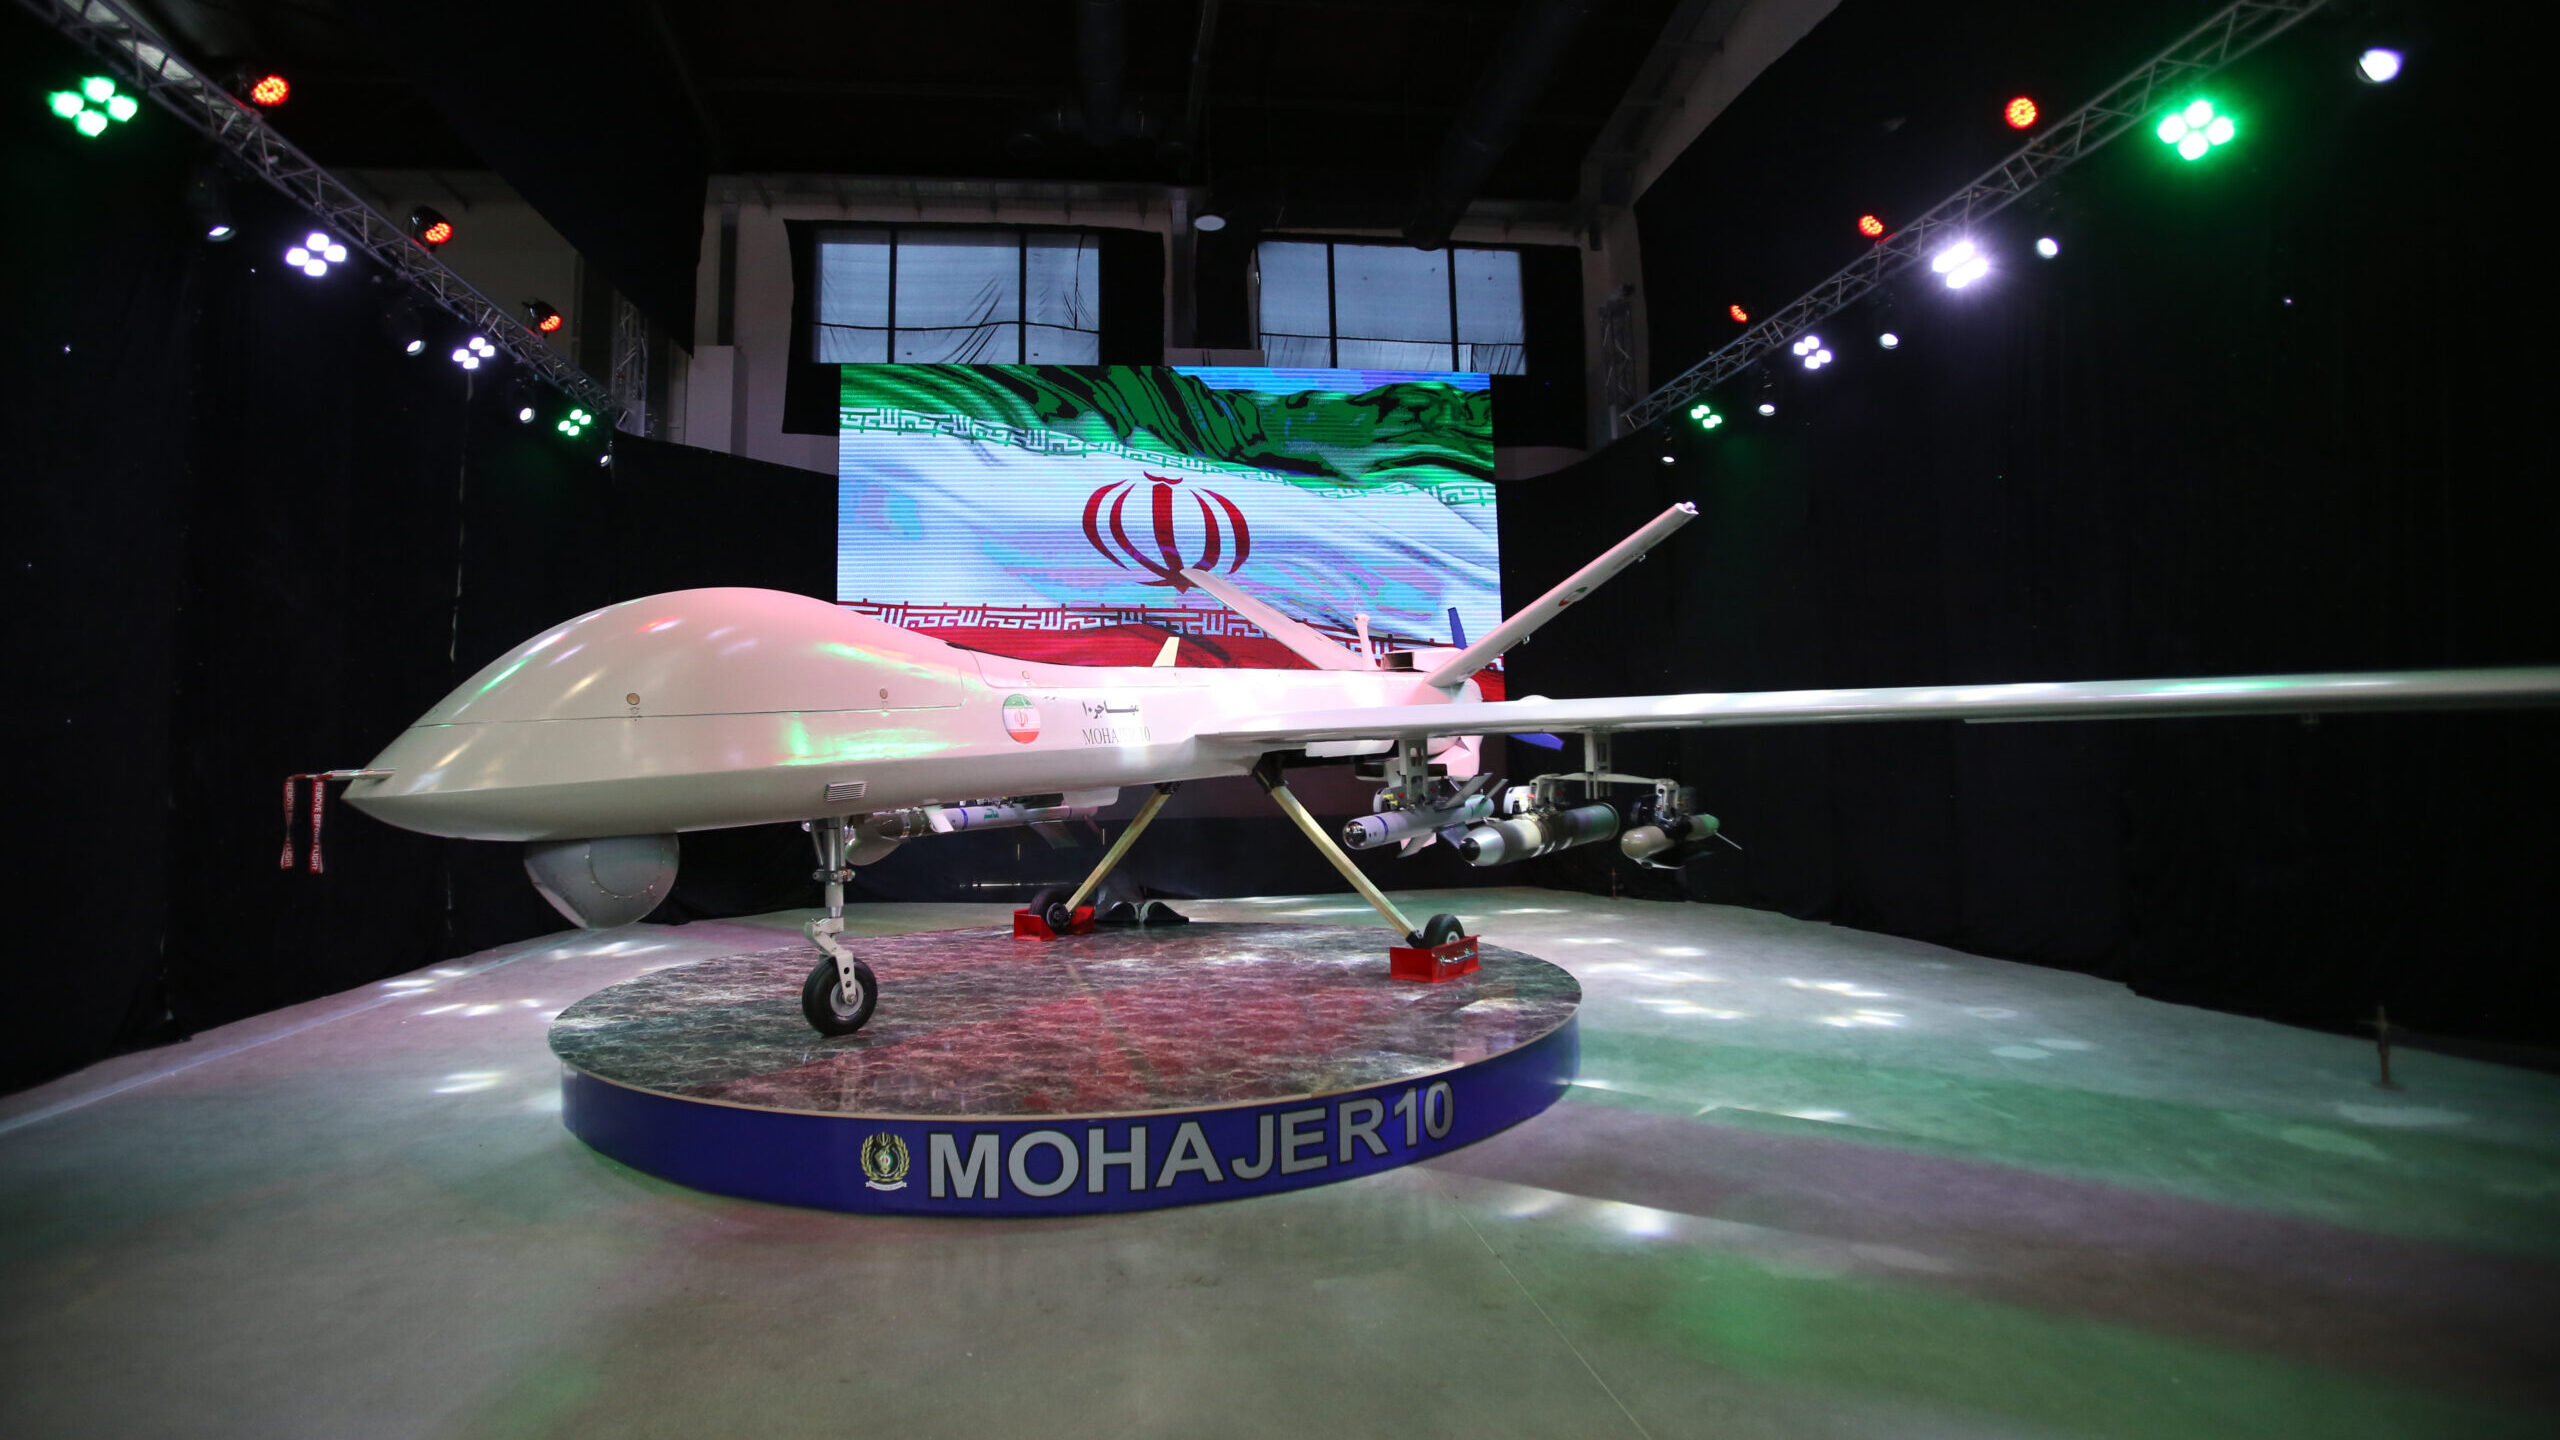 Iran unveils Mohajer-10 combat UAV, claiming extended range, payload